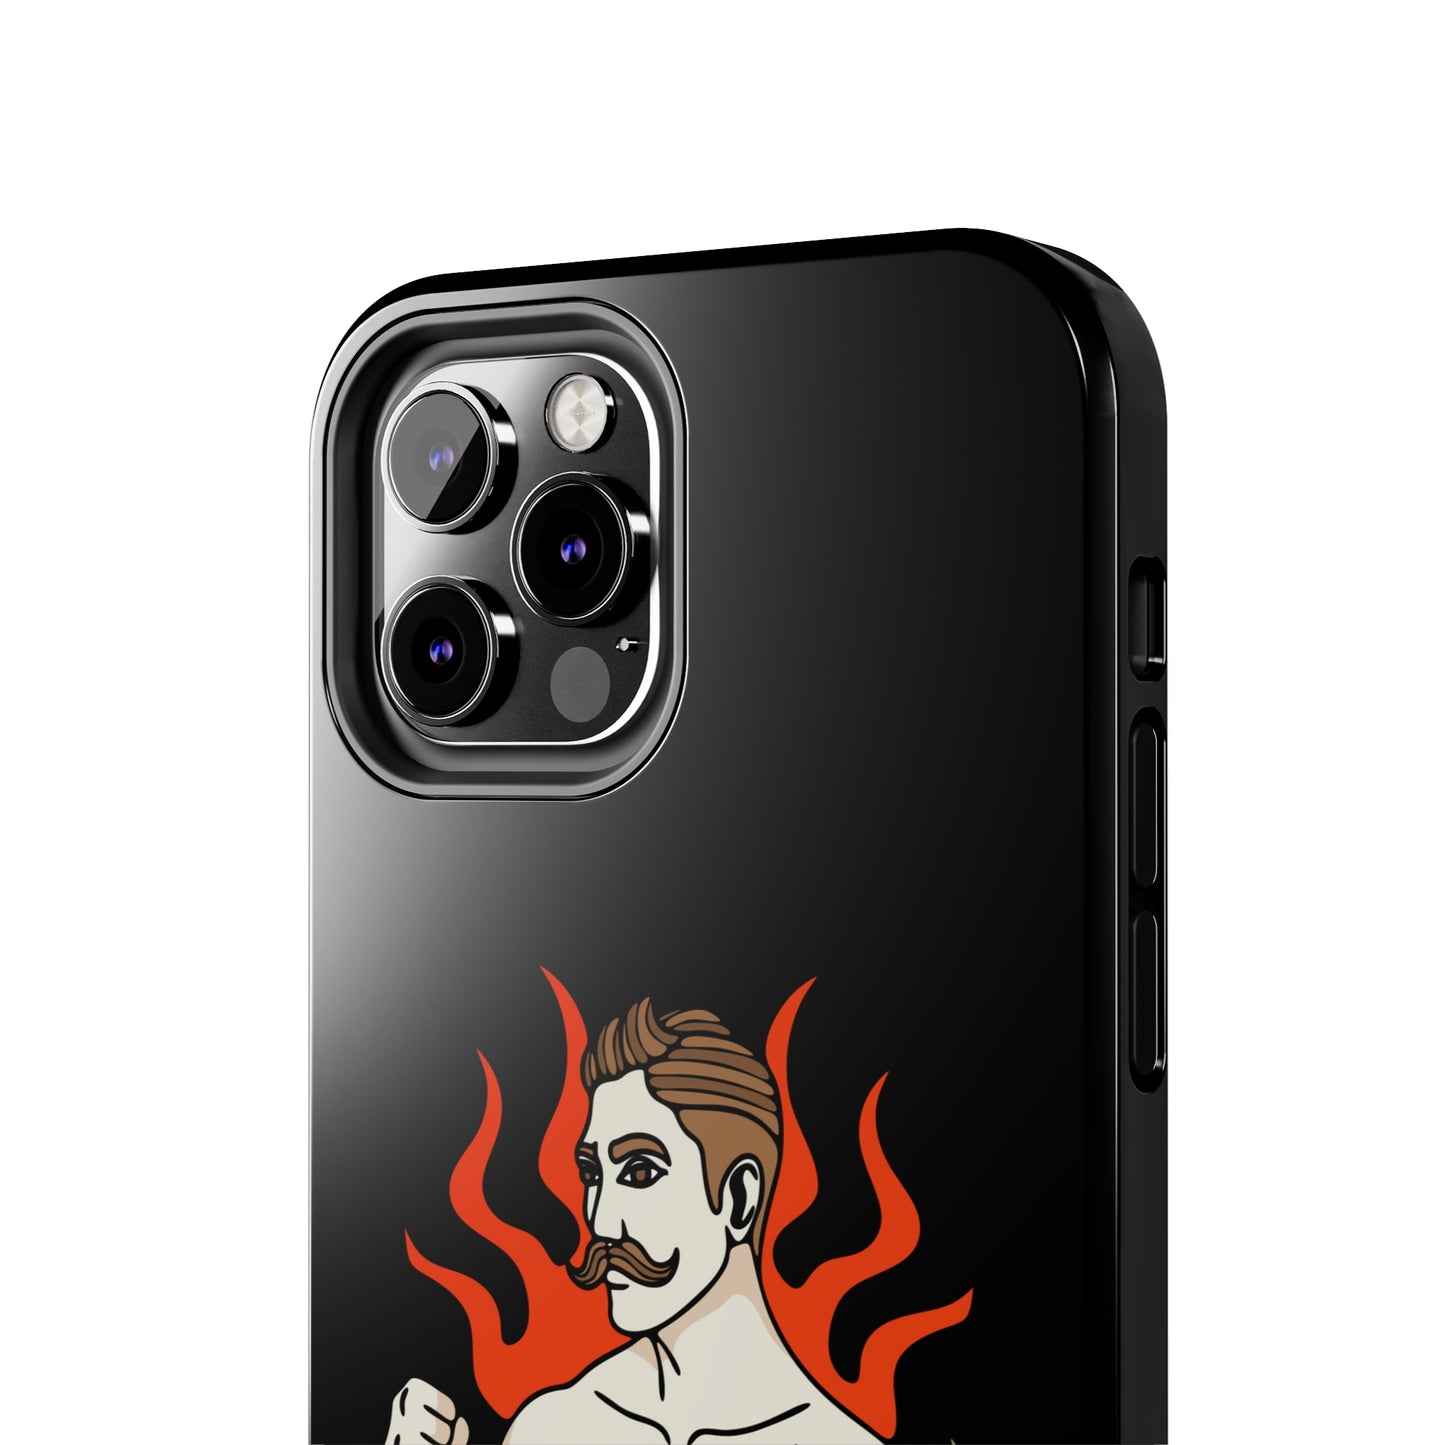 Fighter 1 - Tough Phone Cases